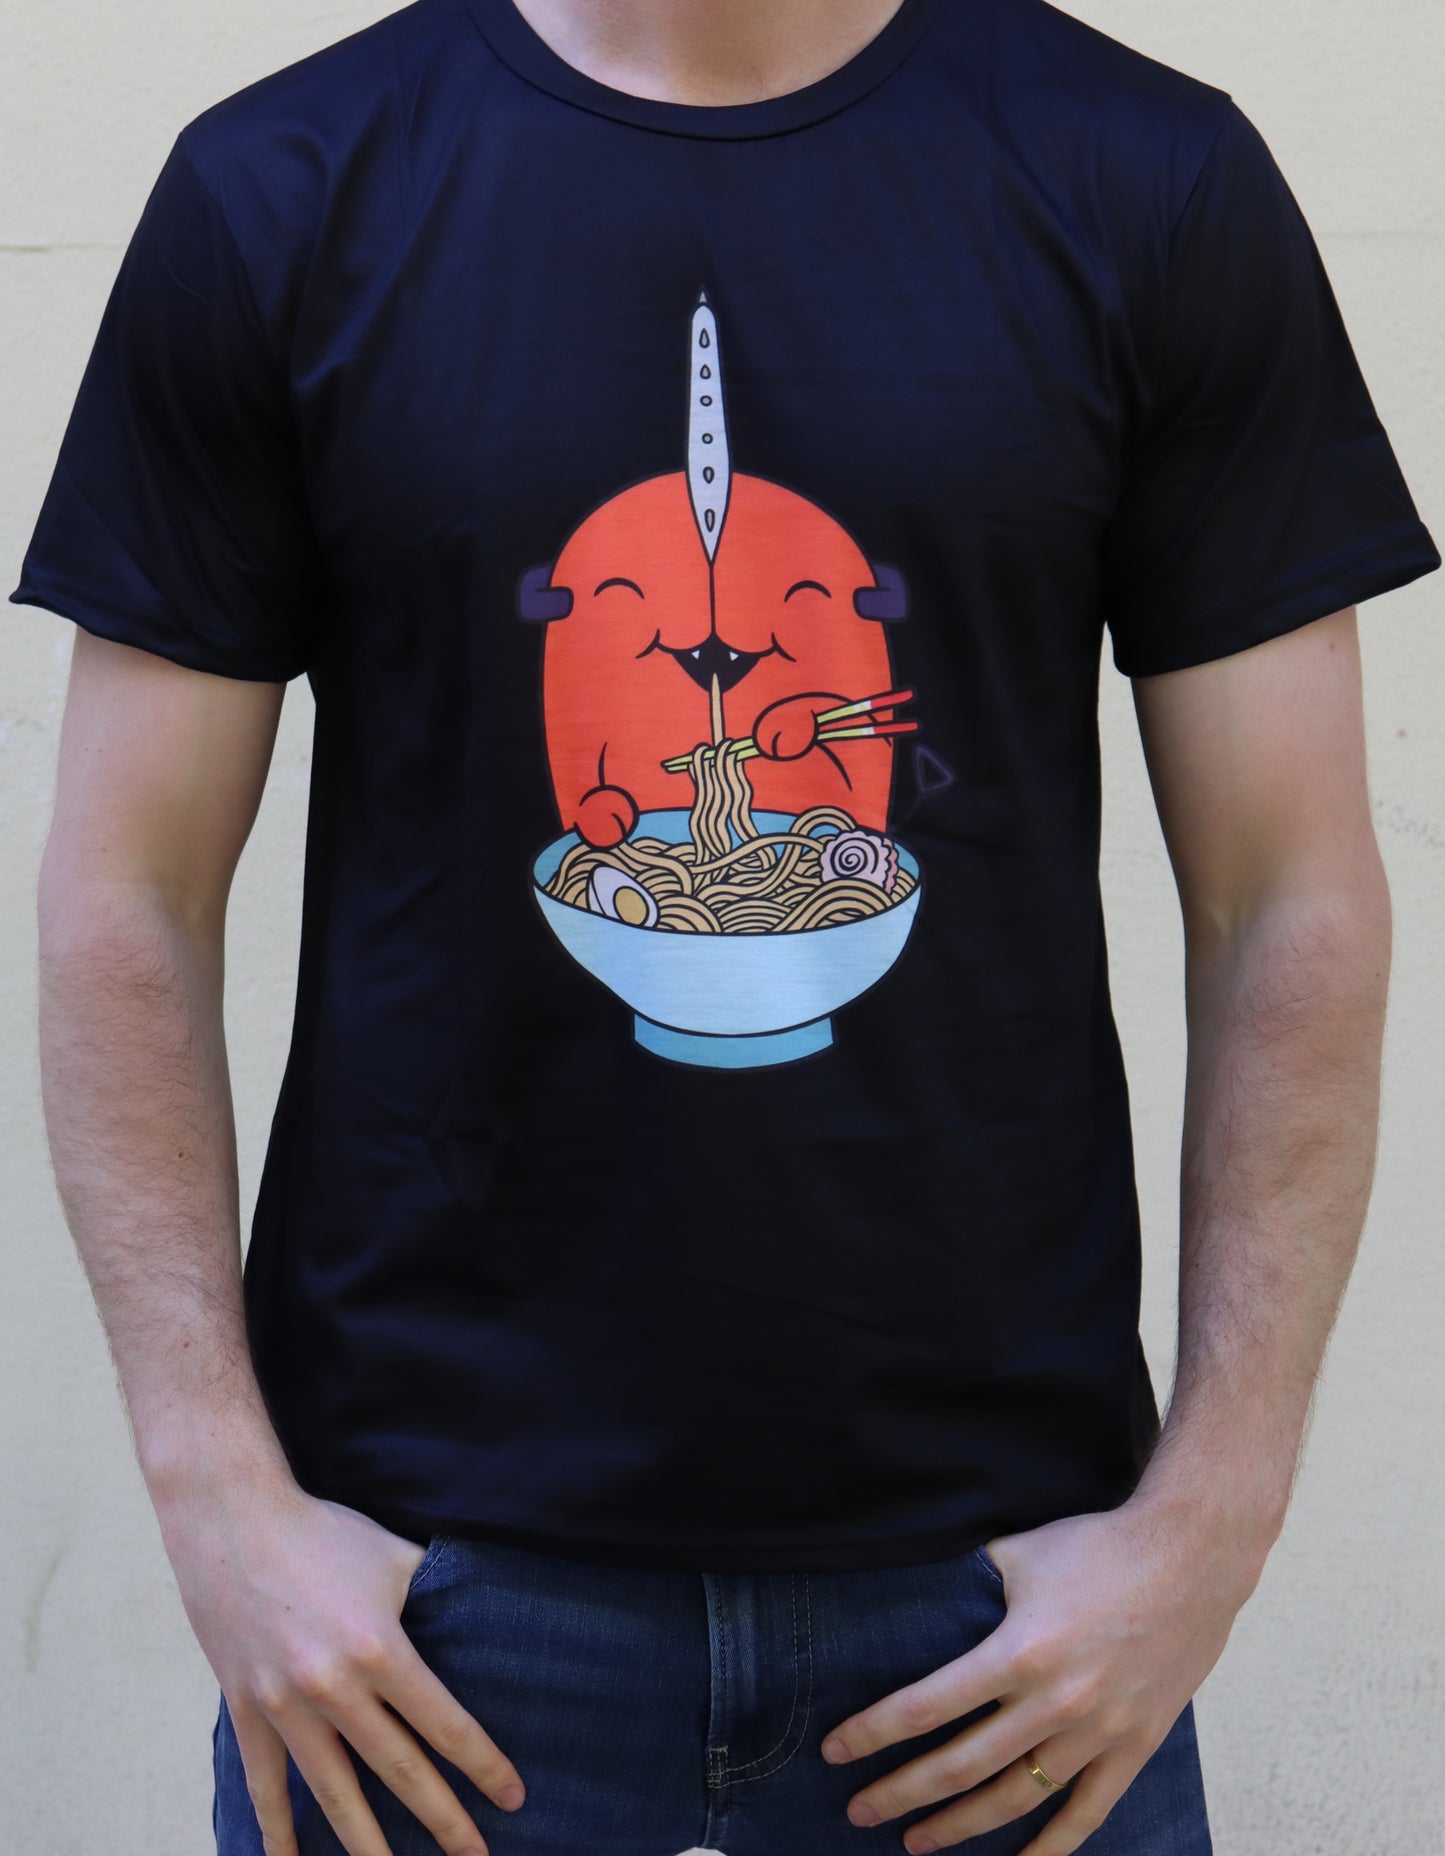 Chainsaw Man - Pochita Noodle TShirt (Price Does Not Include Shipping - Please Read Description)